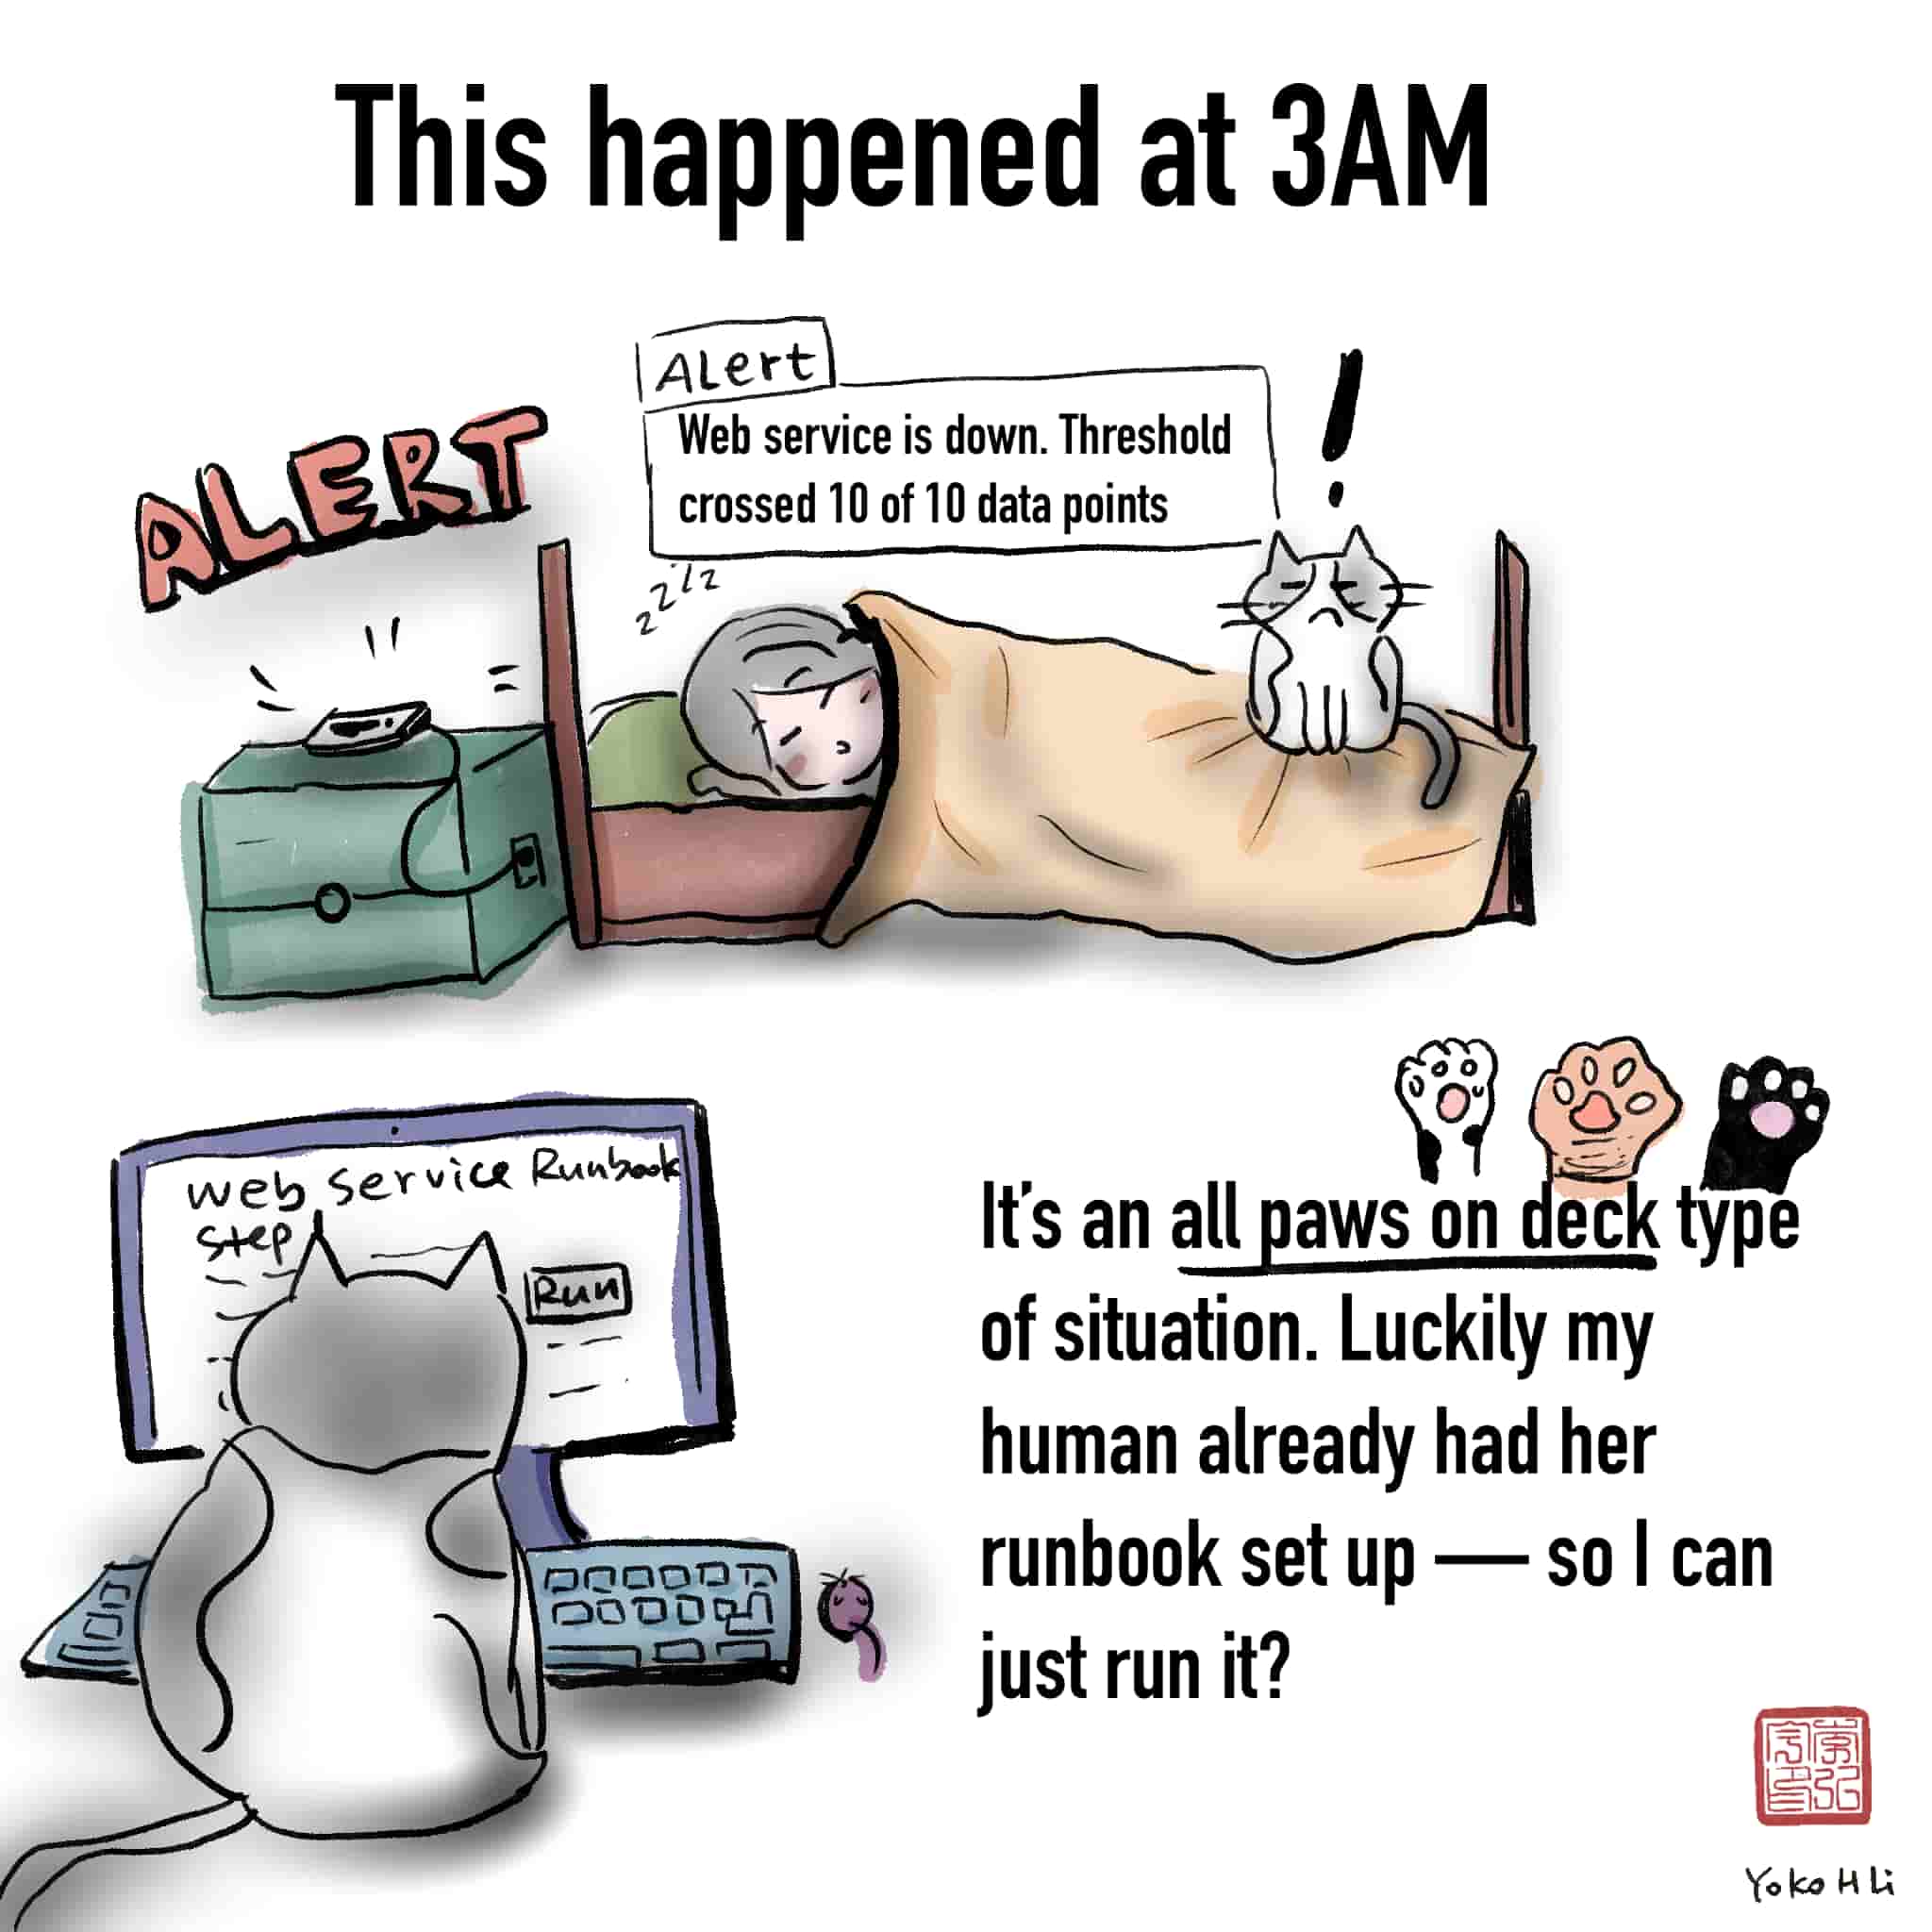 Comic: This happened at 3AM. Alert: Web service is down. Image: Cat woken up on bed, then on computer. Threshold crossed 10 of 10 data points. It's an all paws on deck type of situation. Luckily my human already had her runbook set up -- so I can just run it?